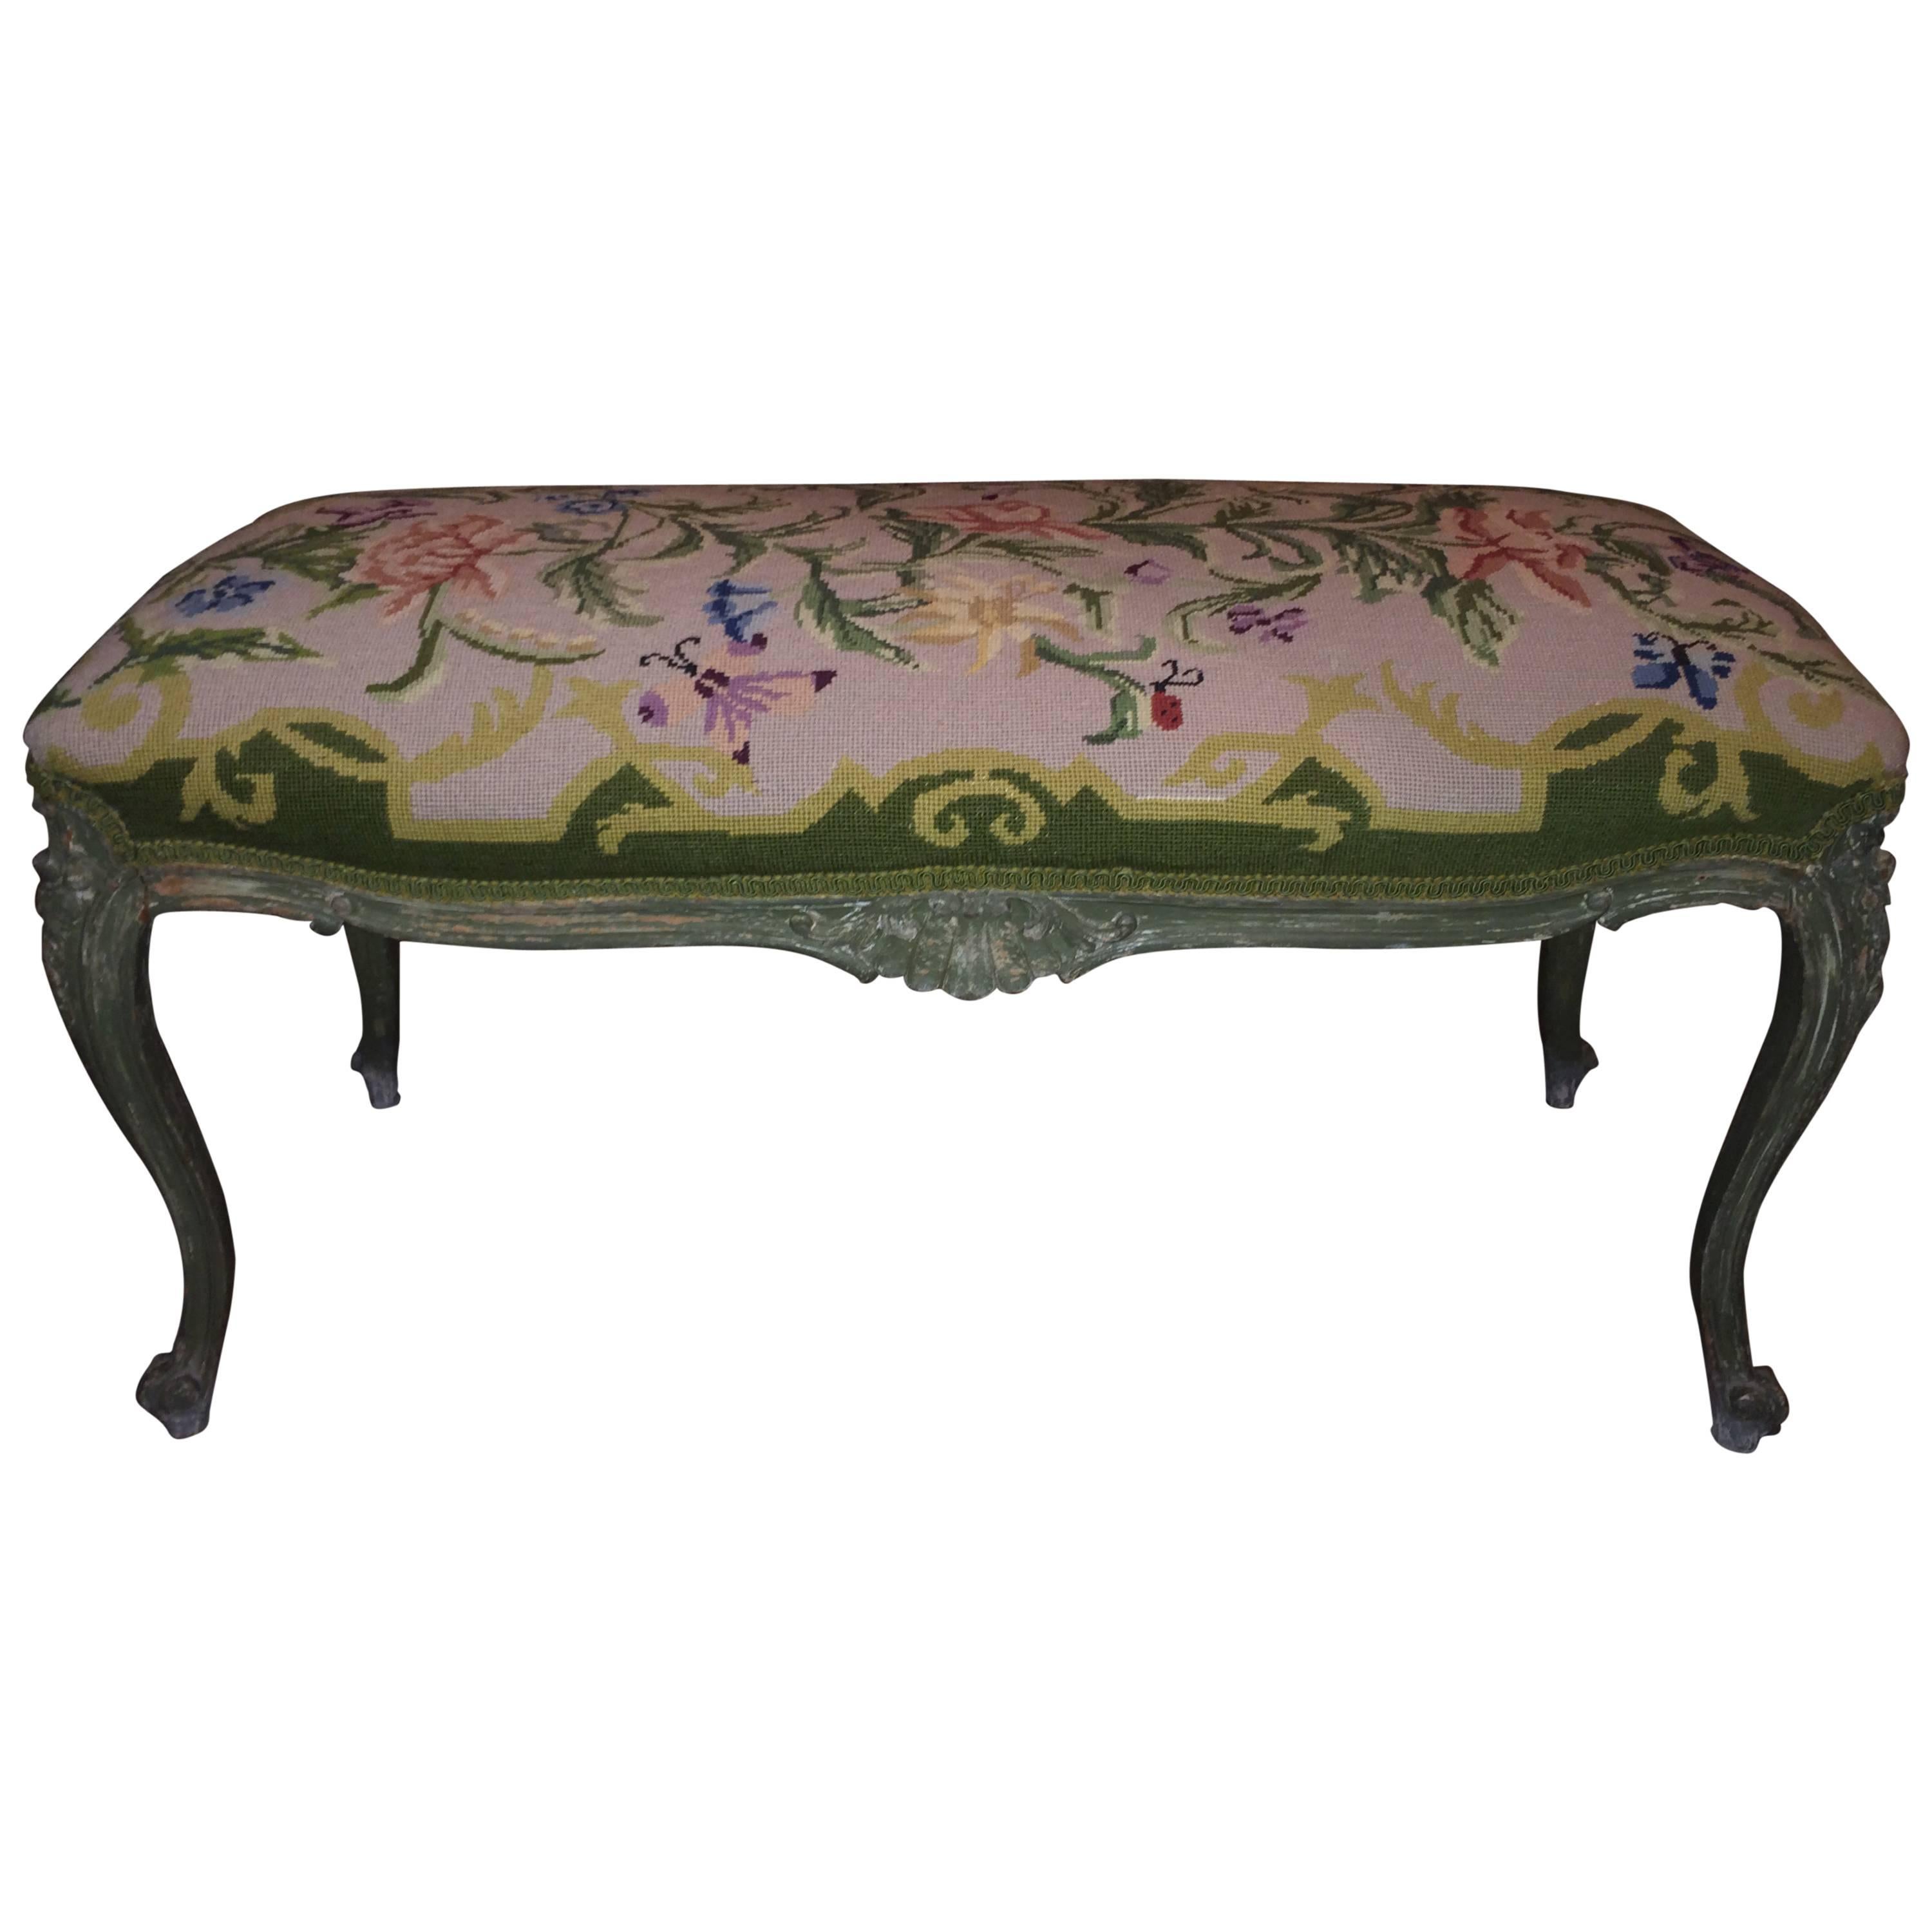 French Style Aubusson Needlepoint Bench